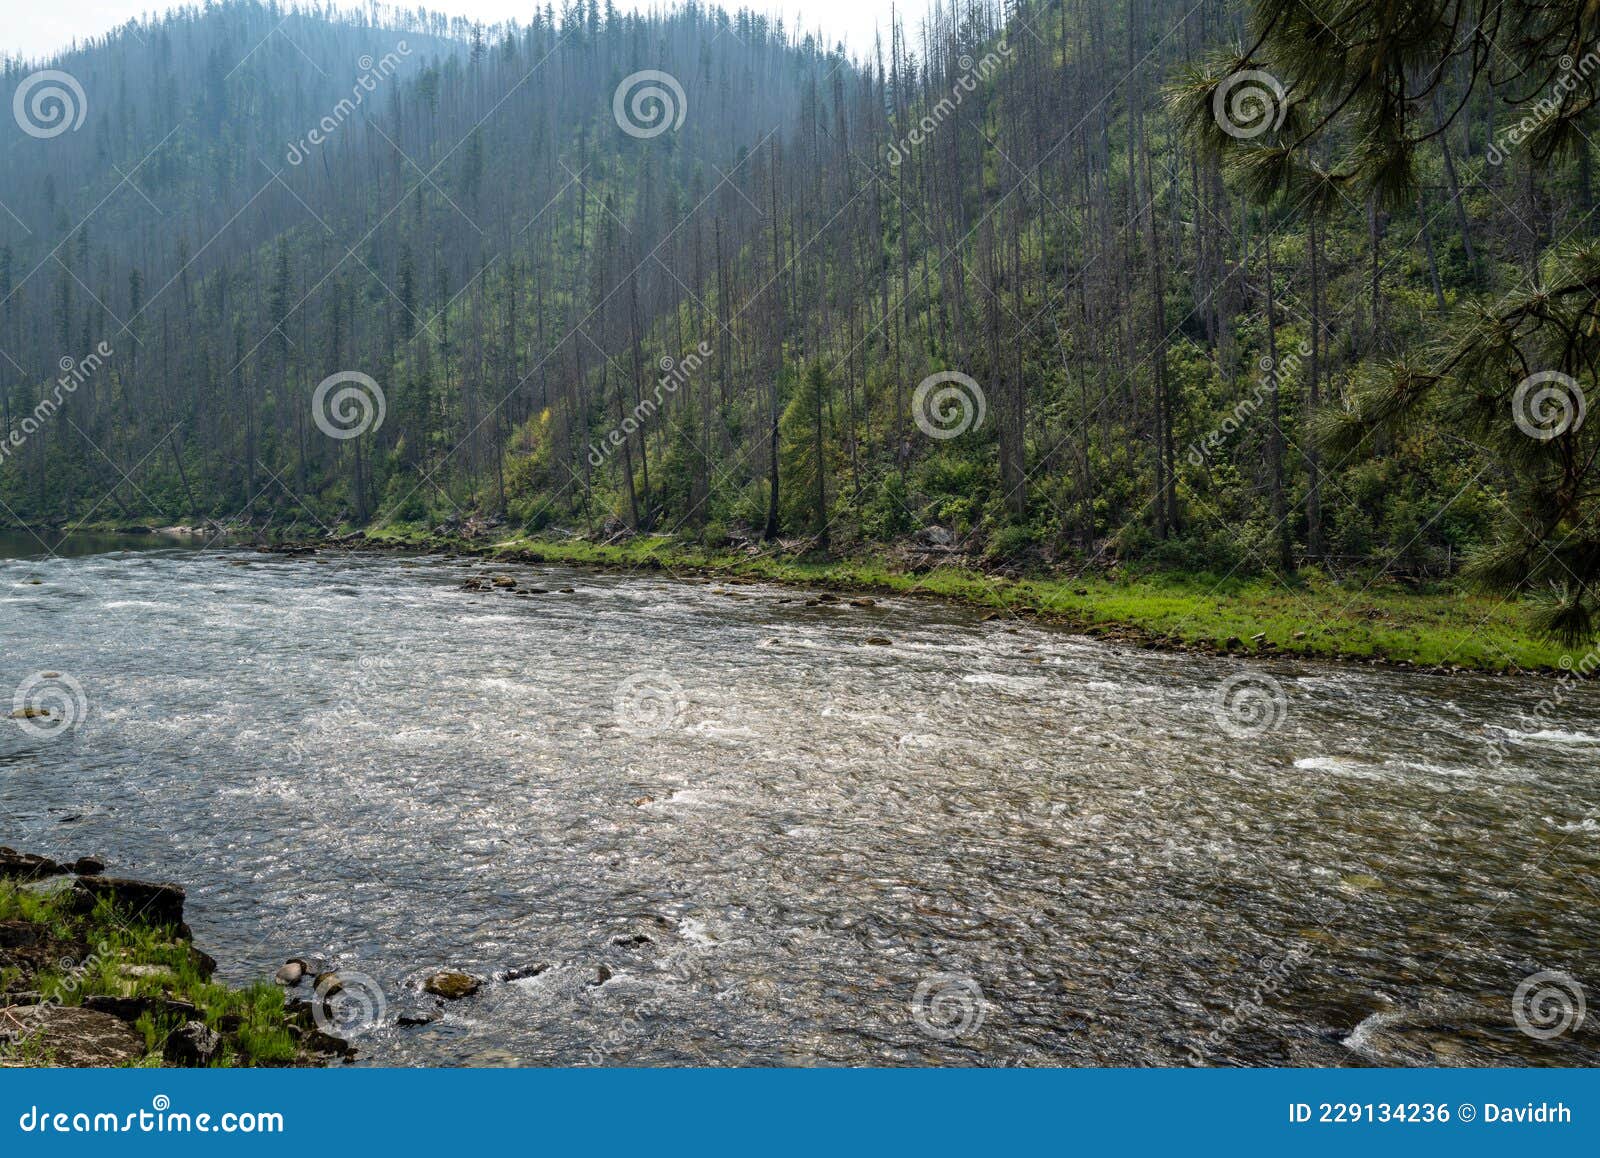 the selway river east of lowell, idaho, usa